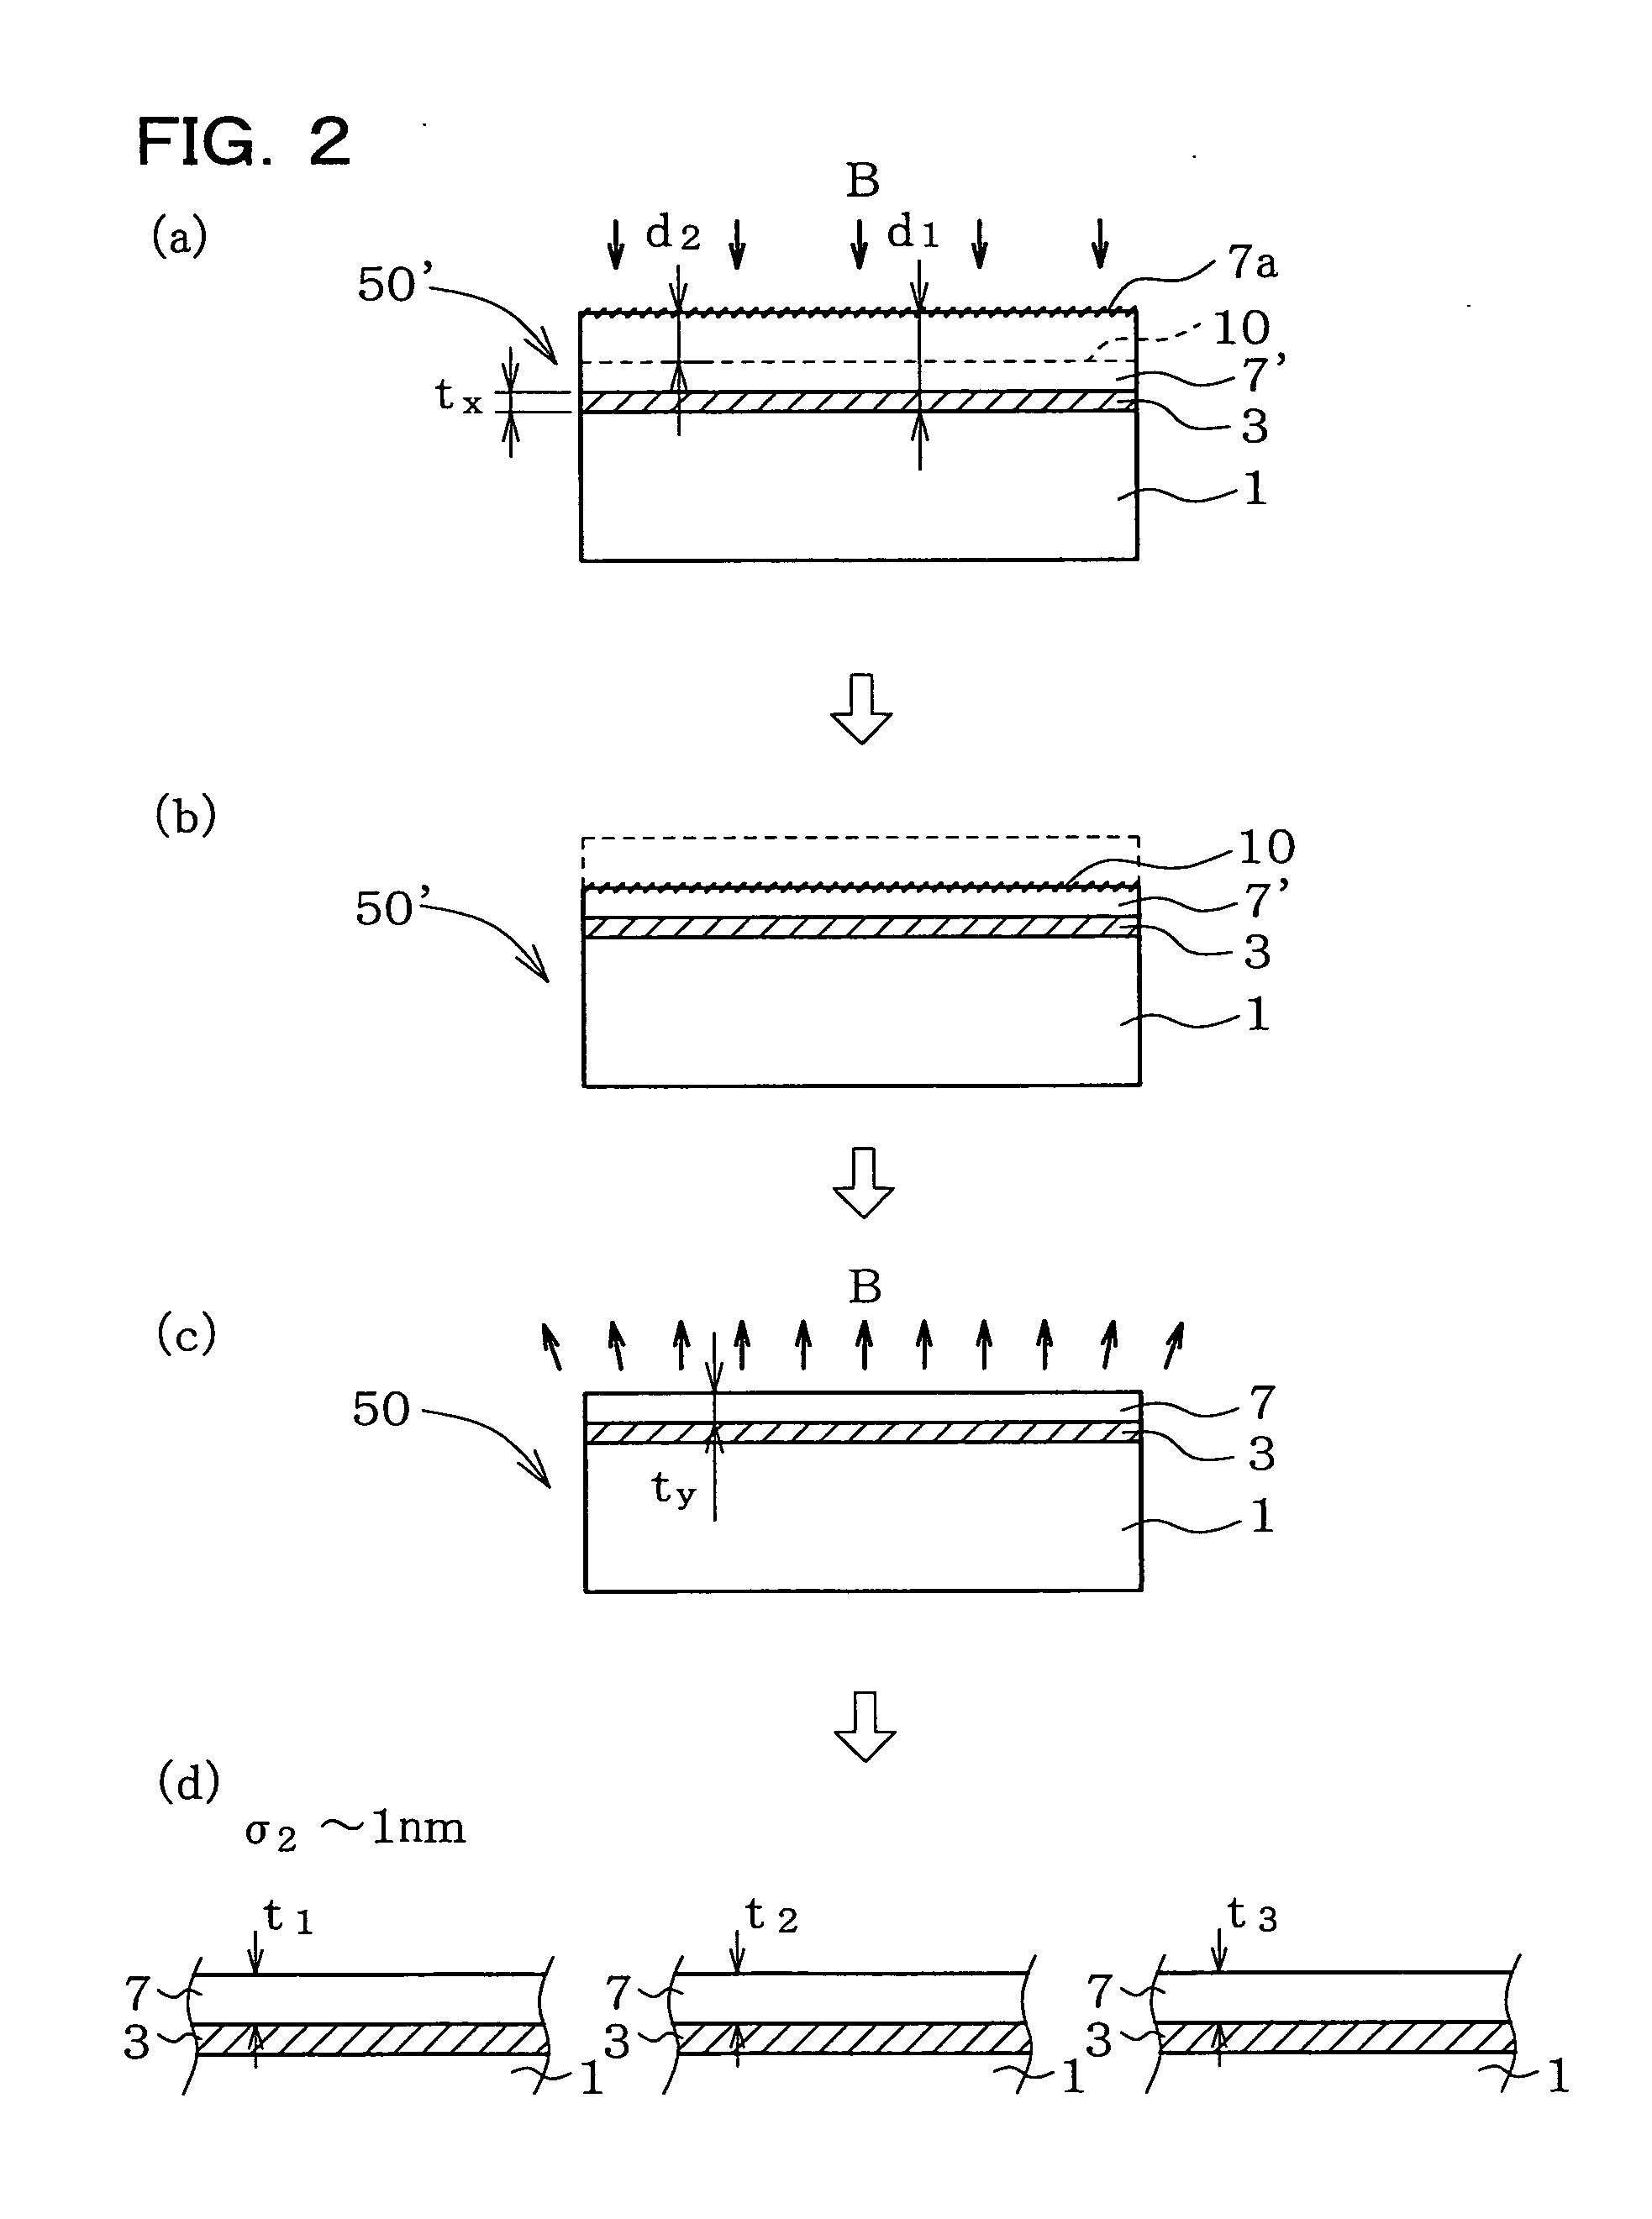 Production method for soi wafer